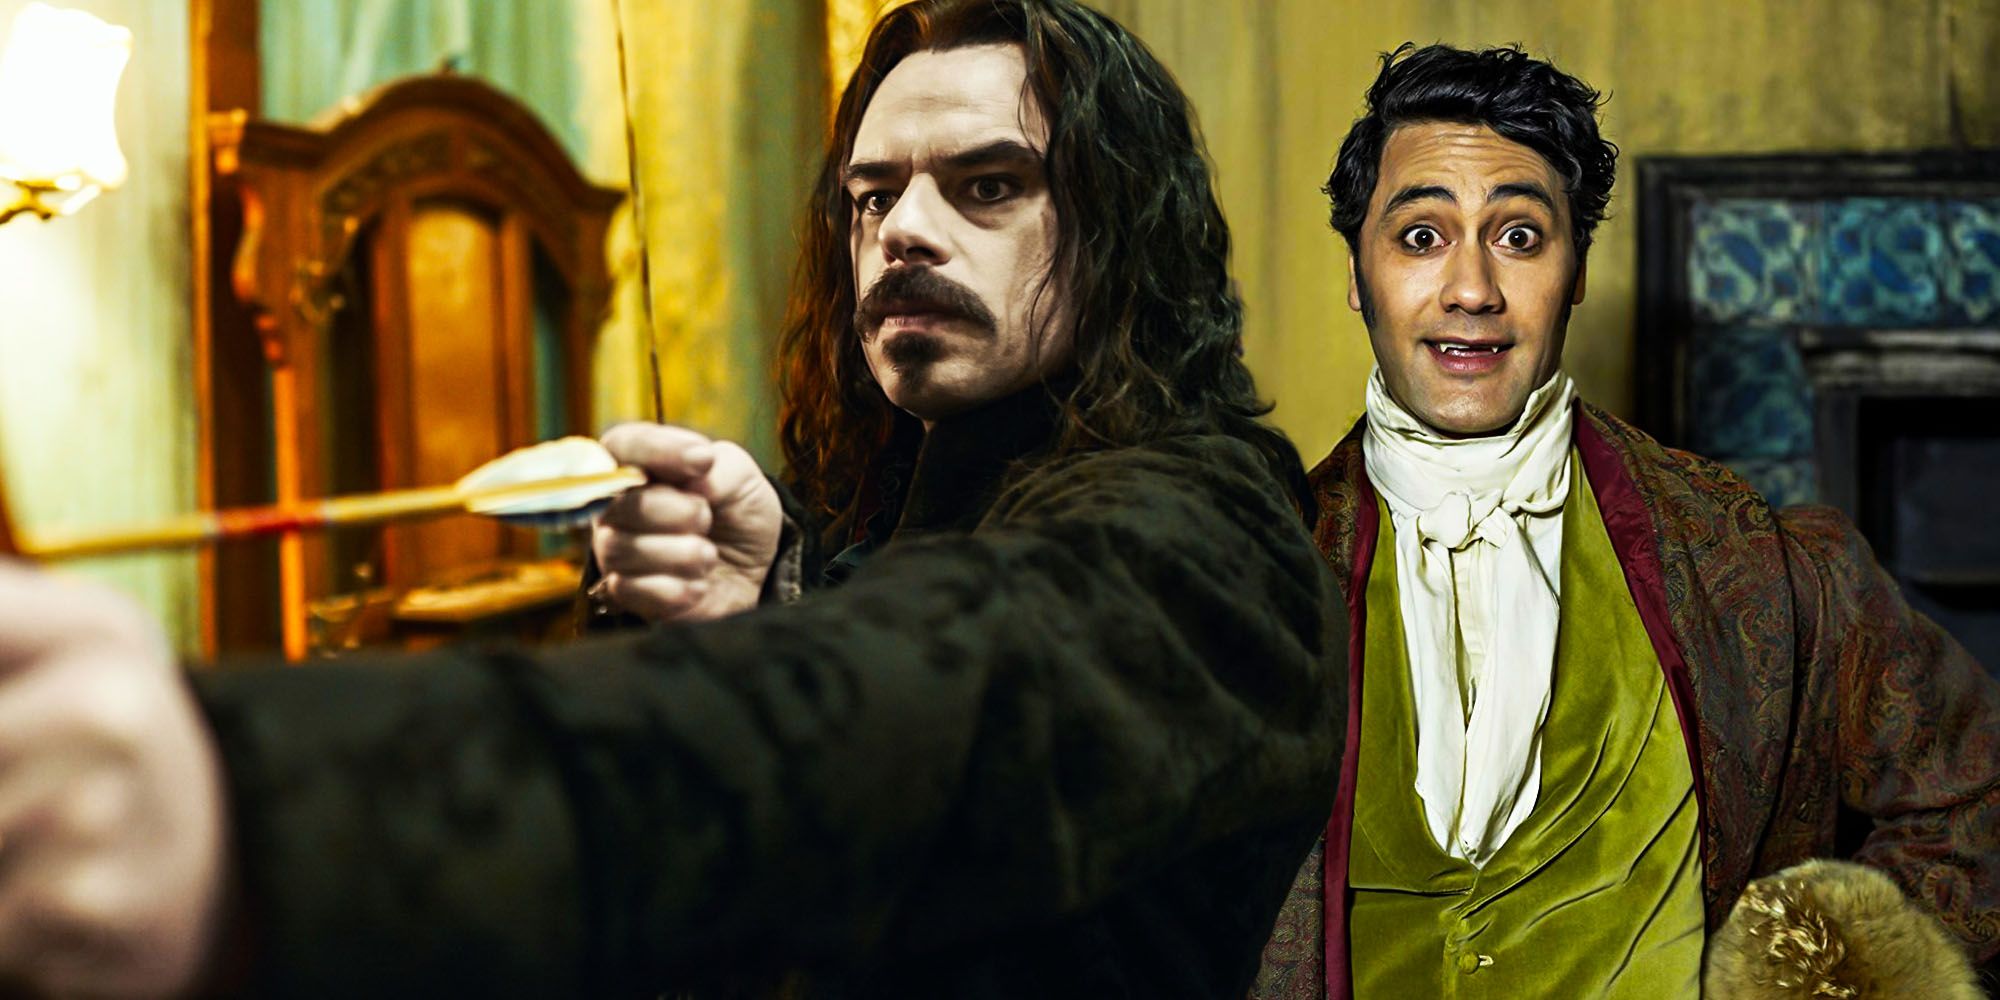 What we do in the shadows act that inspired the movie